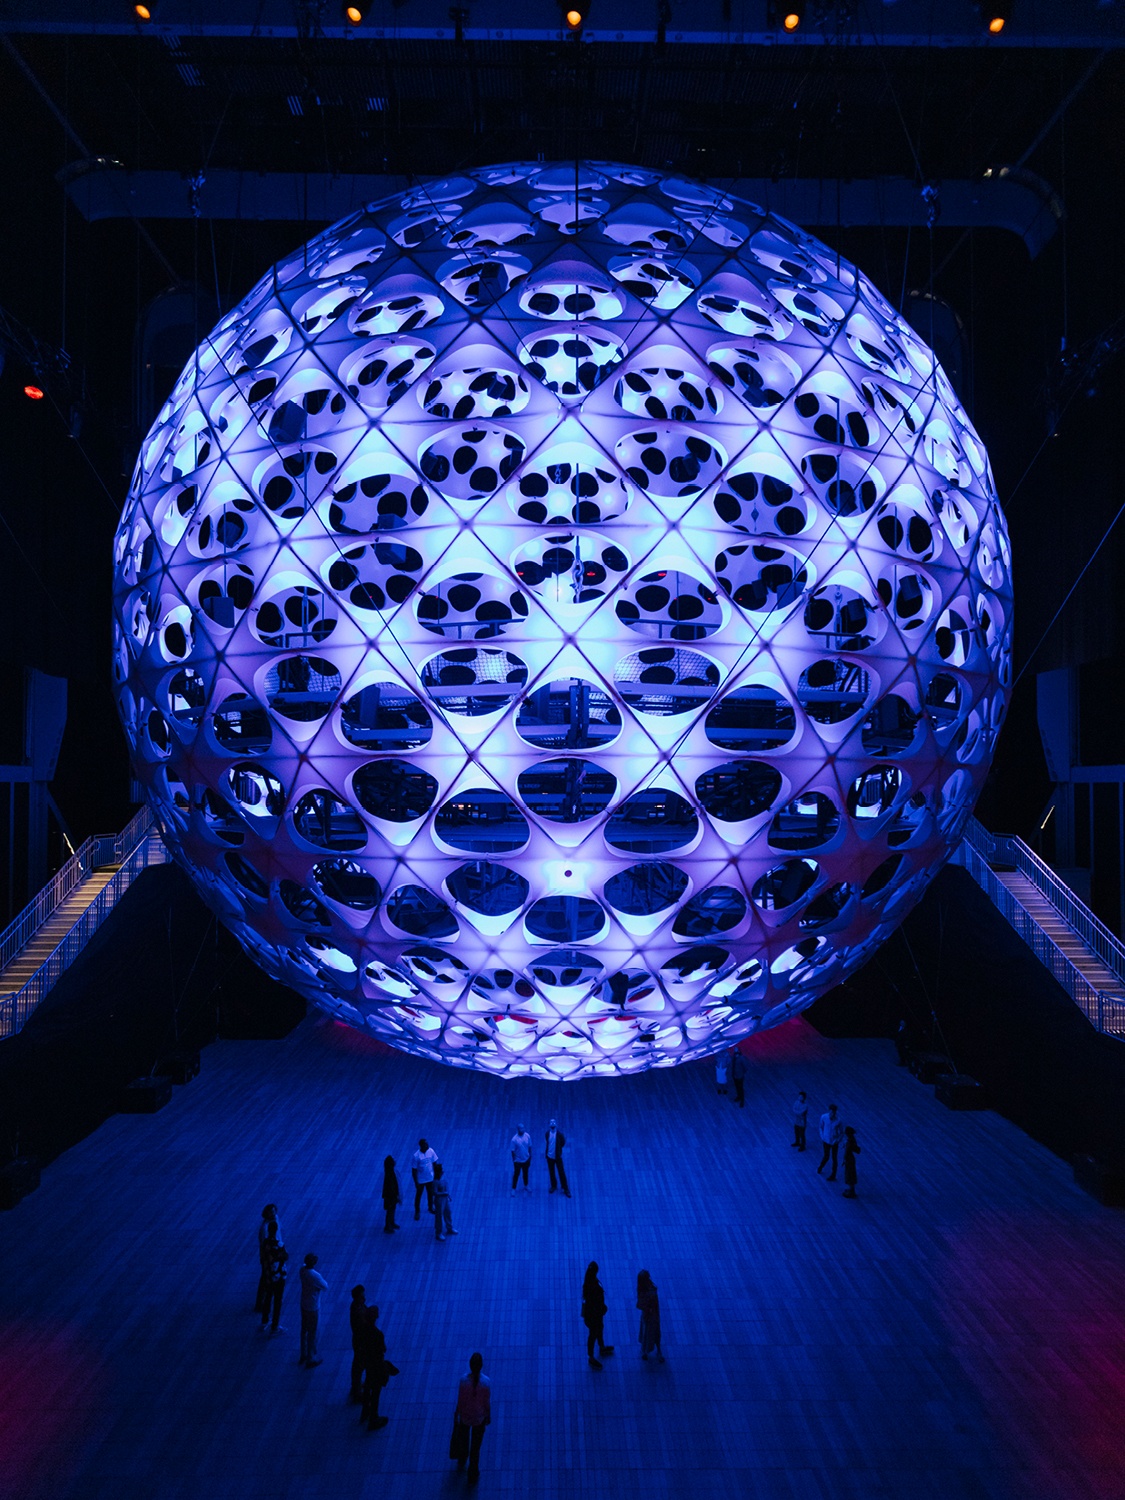 A large spherical structure hangs from a 115-foot-tall ceiling above roughly 20 people who stand below it. The sphere is dotted with light nodes that emanate a purplish blue light. The people are small figures beneath the enormous sphere.